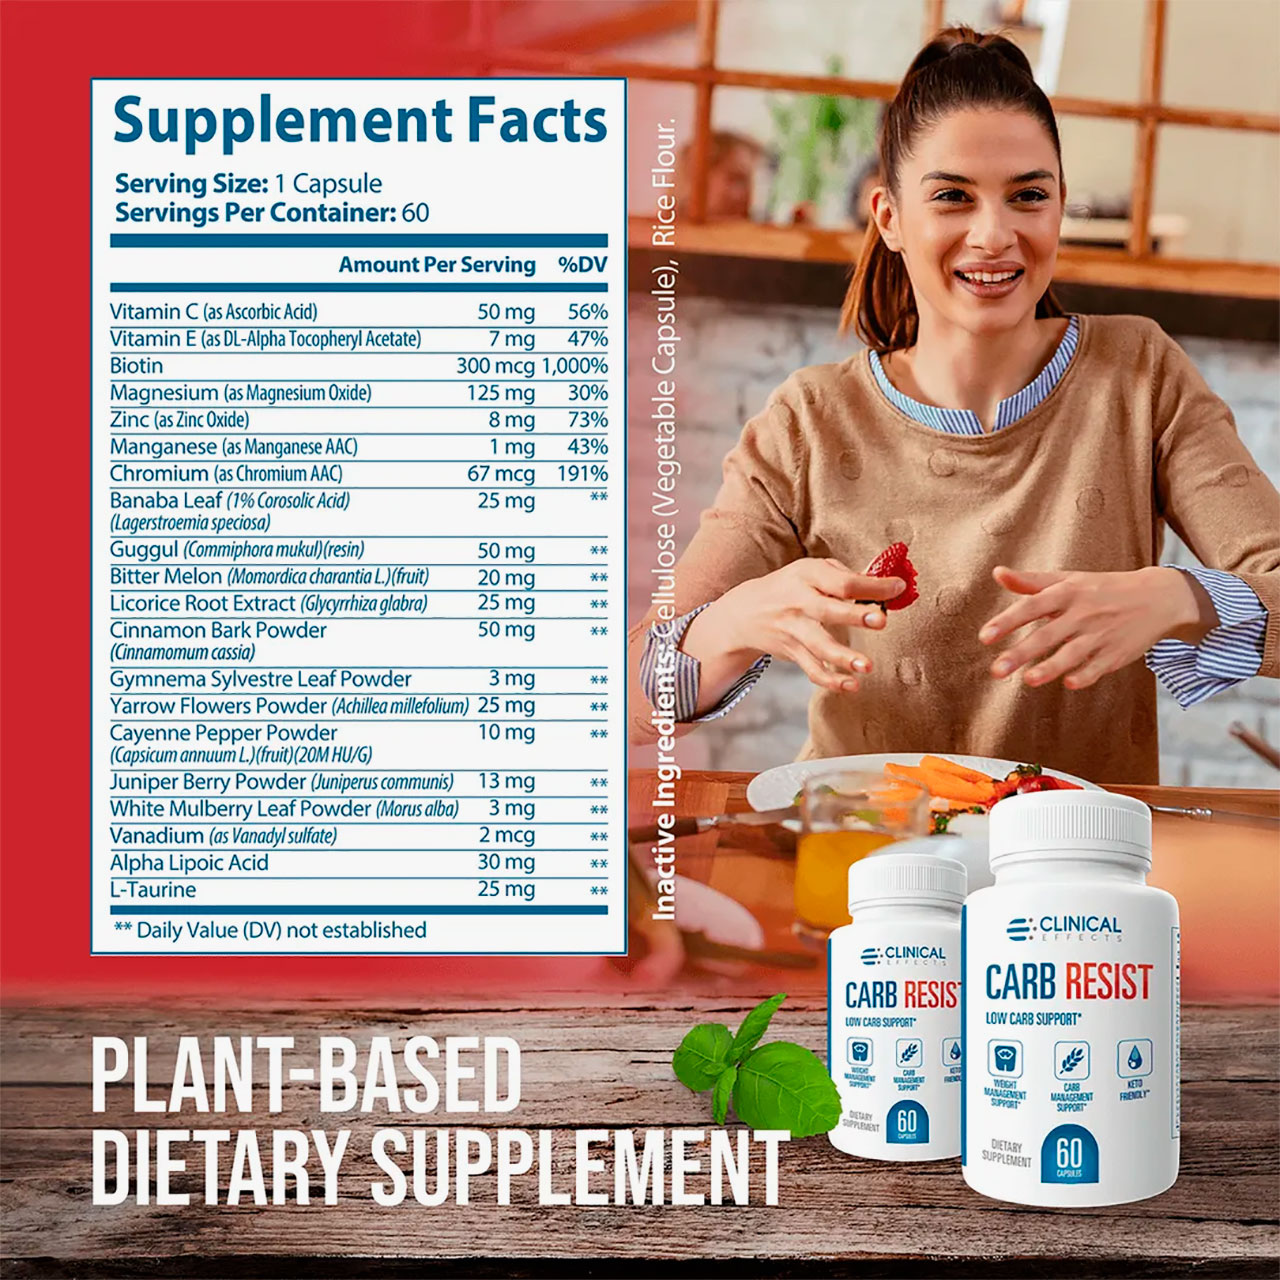 Carb Resist by Clinical Effects Supplement Facts